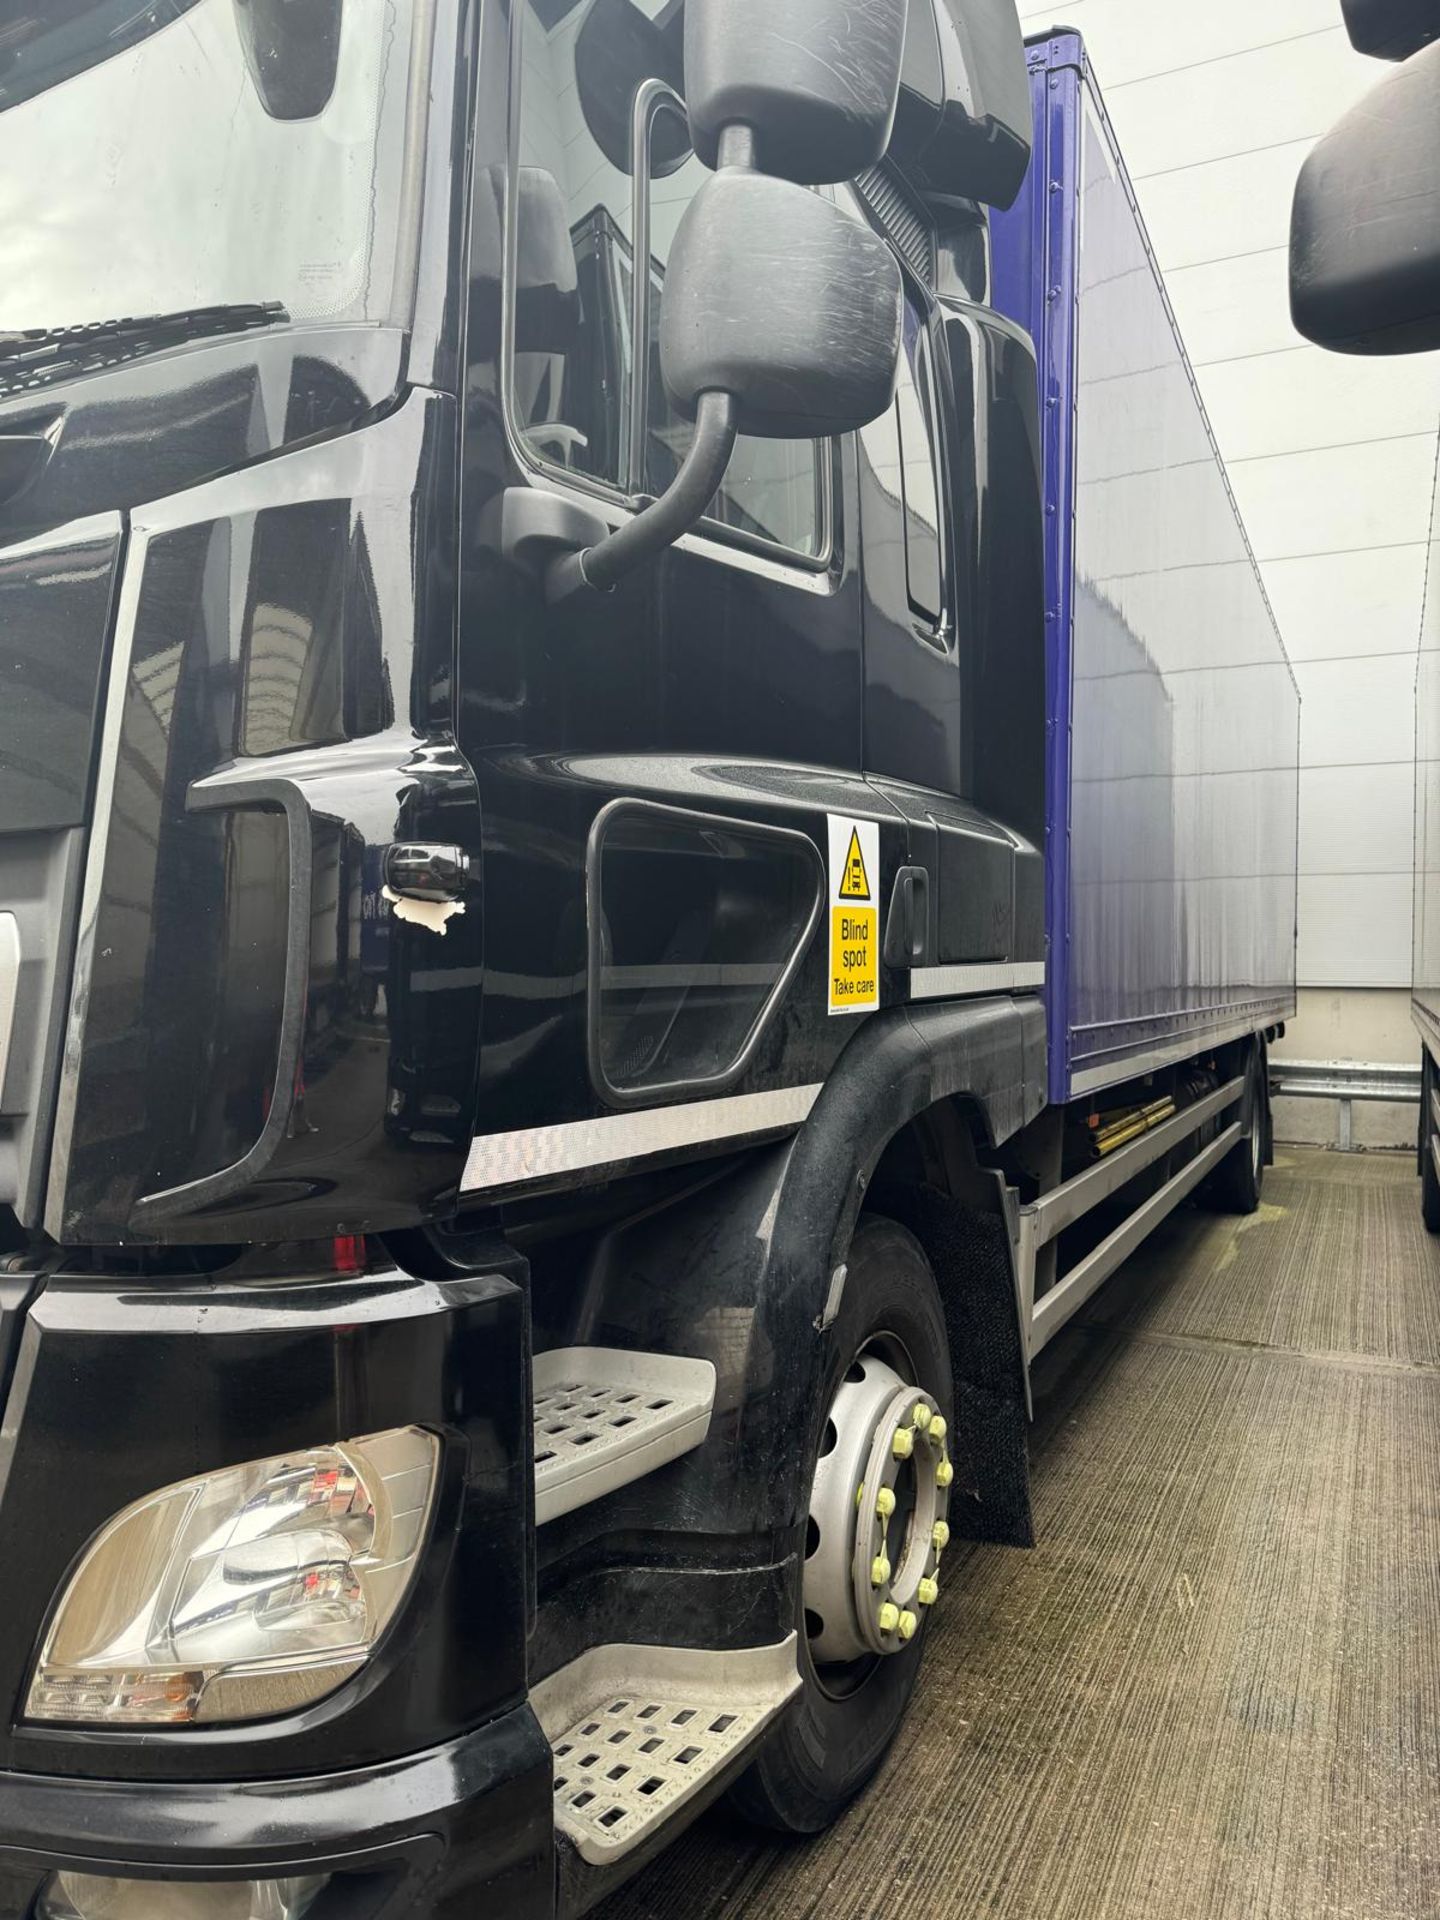 2019, DAF CF 260 FA (Ex-Fleet Owned & Maintained) - FN69 AXG (18 Ton Rigid Truck with Tail Lift) - Image 6 of 16